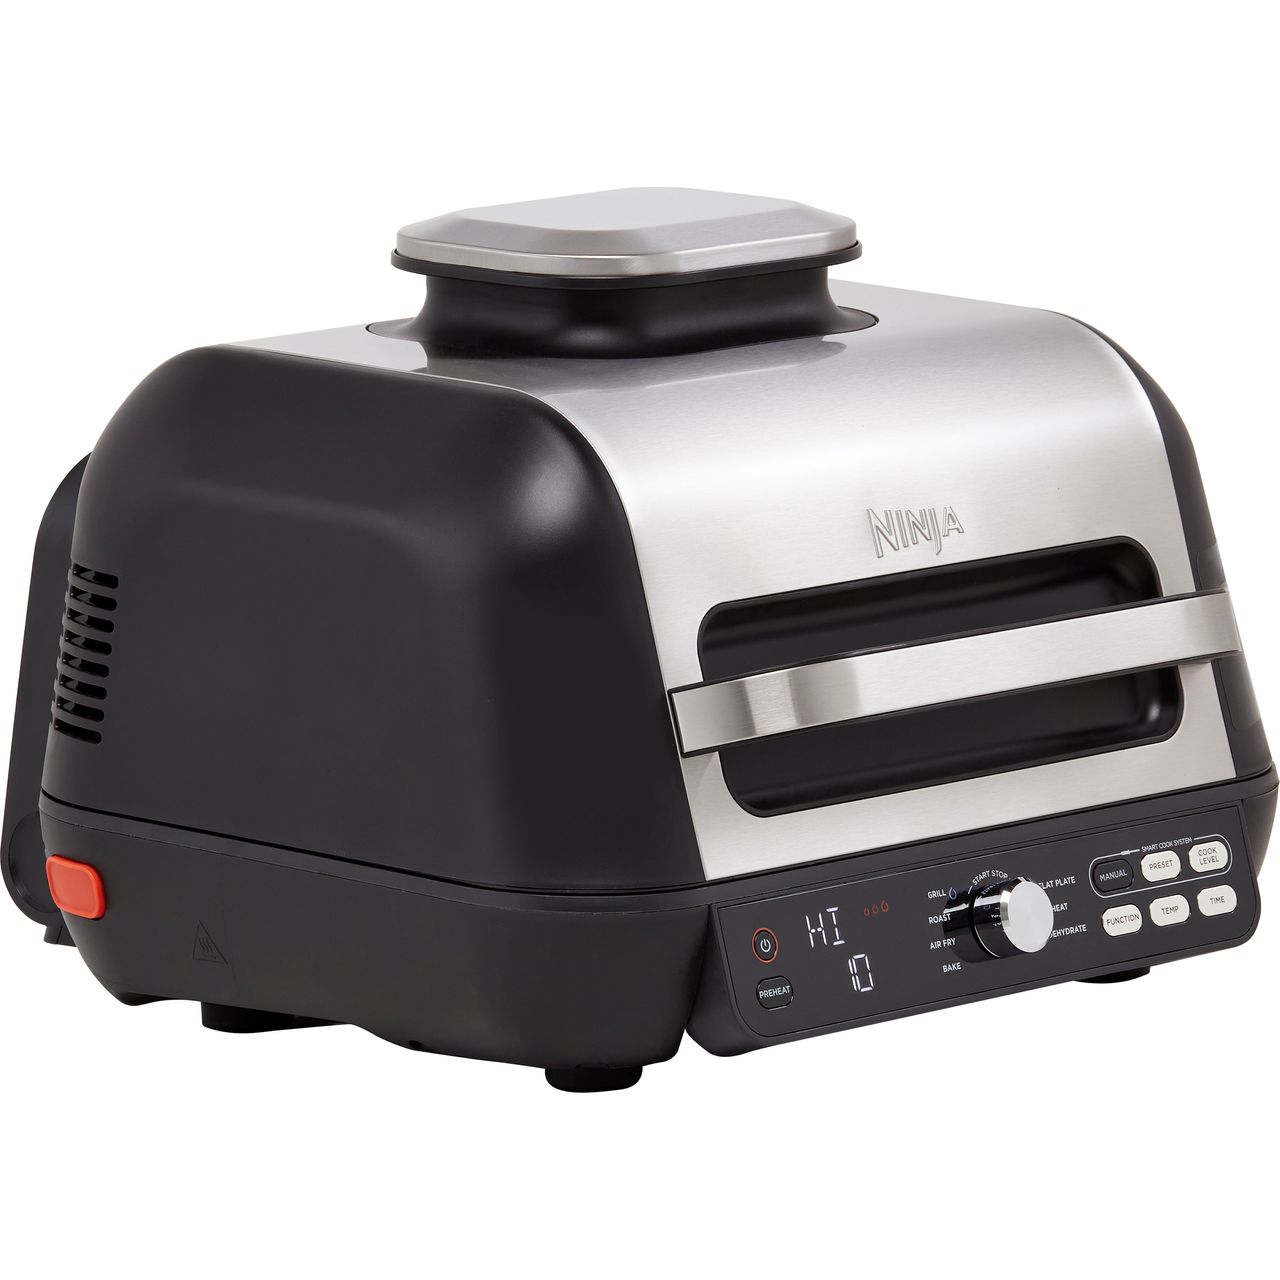 The Ninja® Foodi® Max Pro Grill our editor's love is on sale